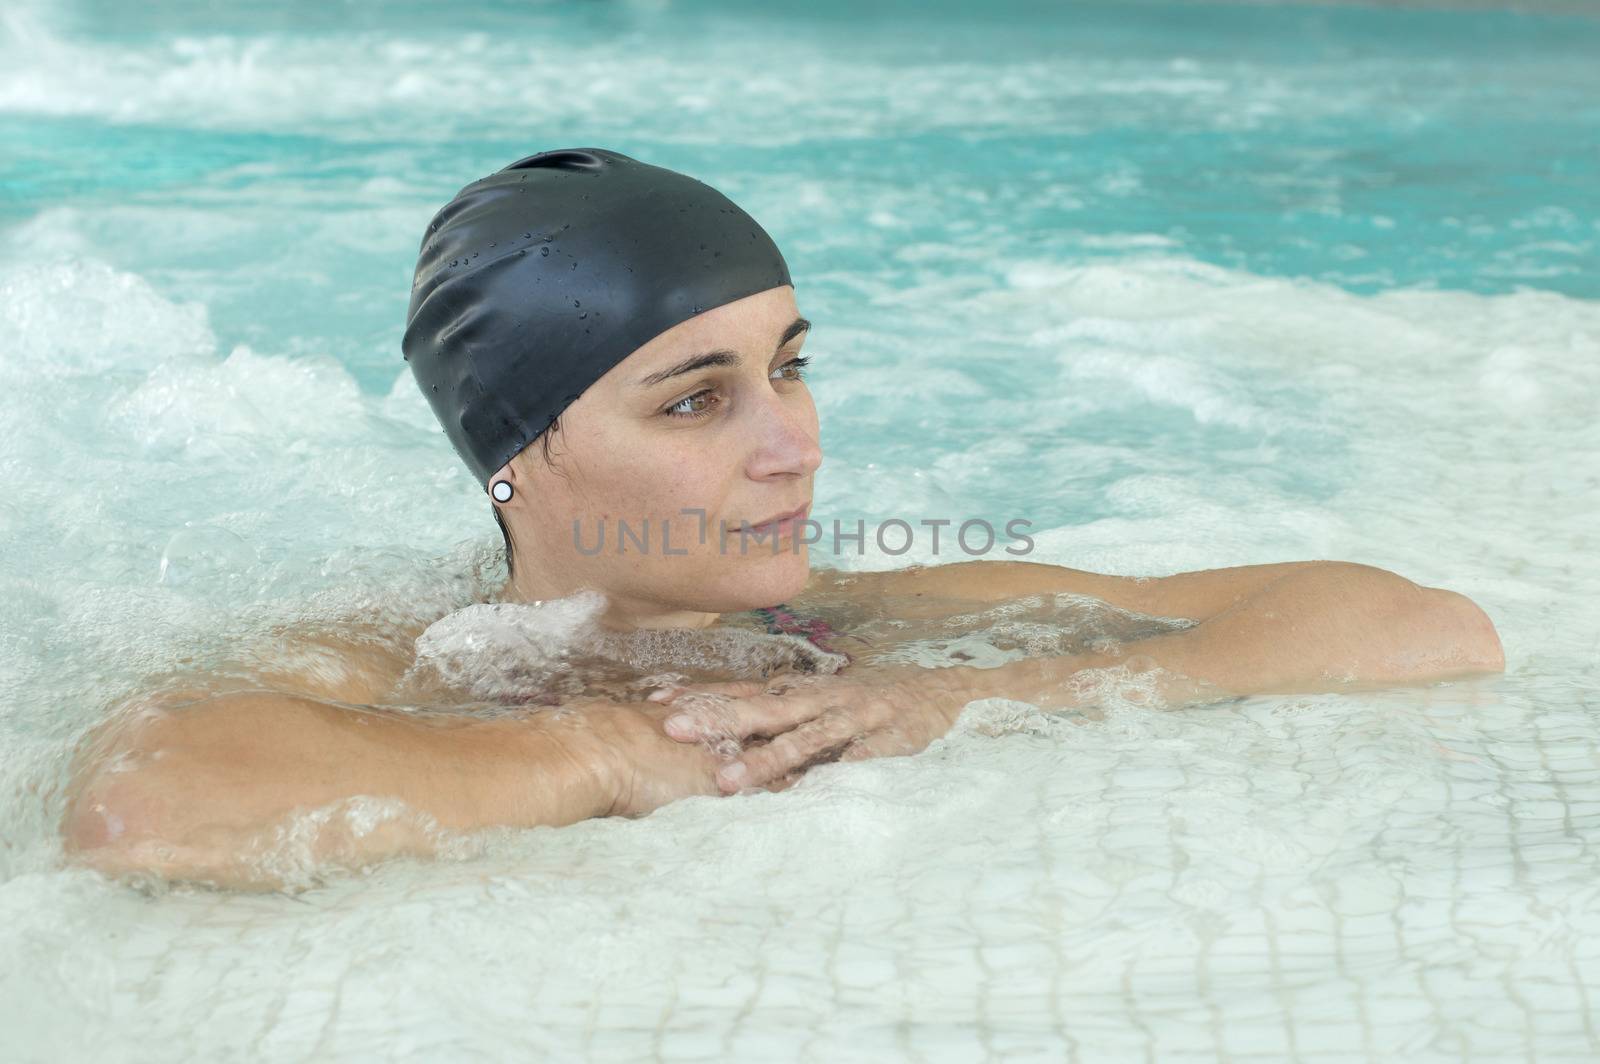 young woman standing in a swimming pool